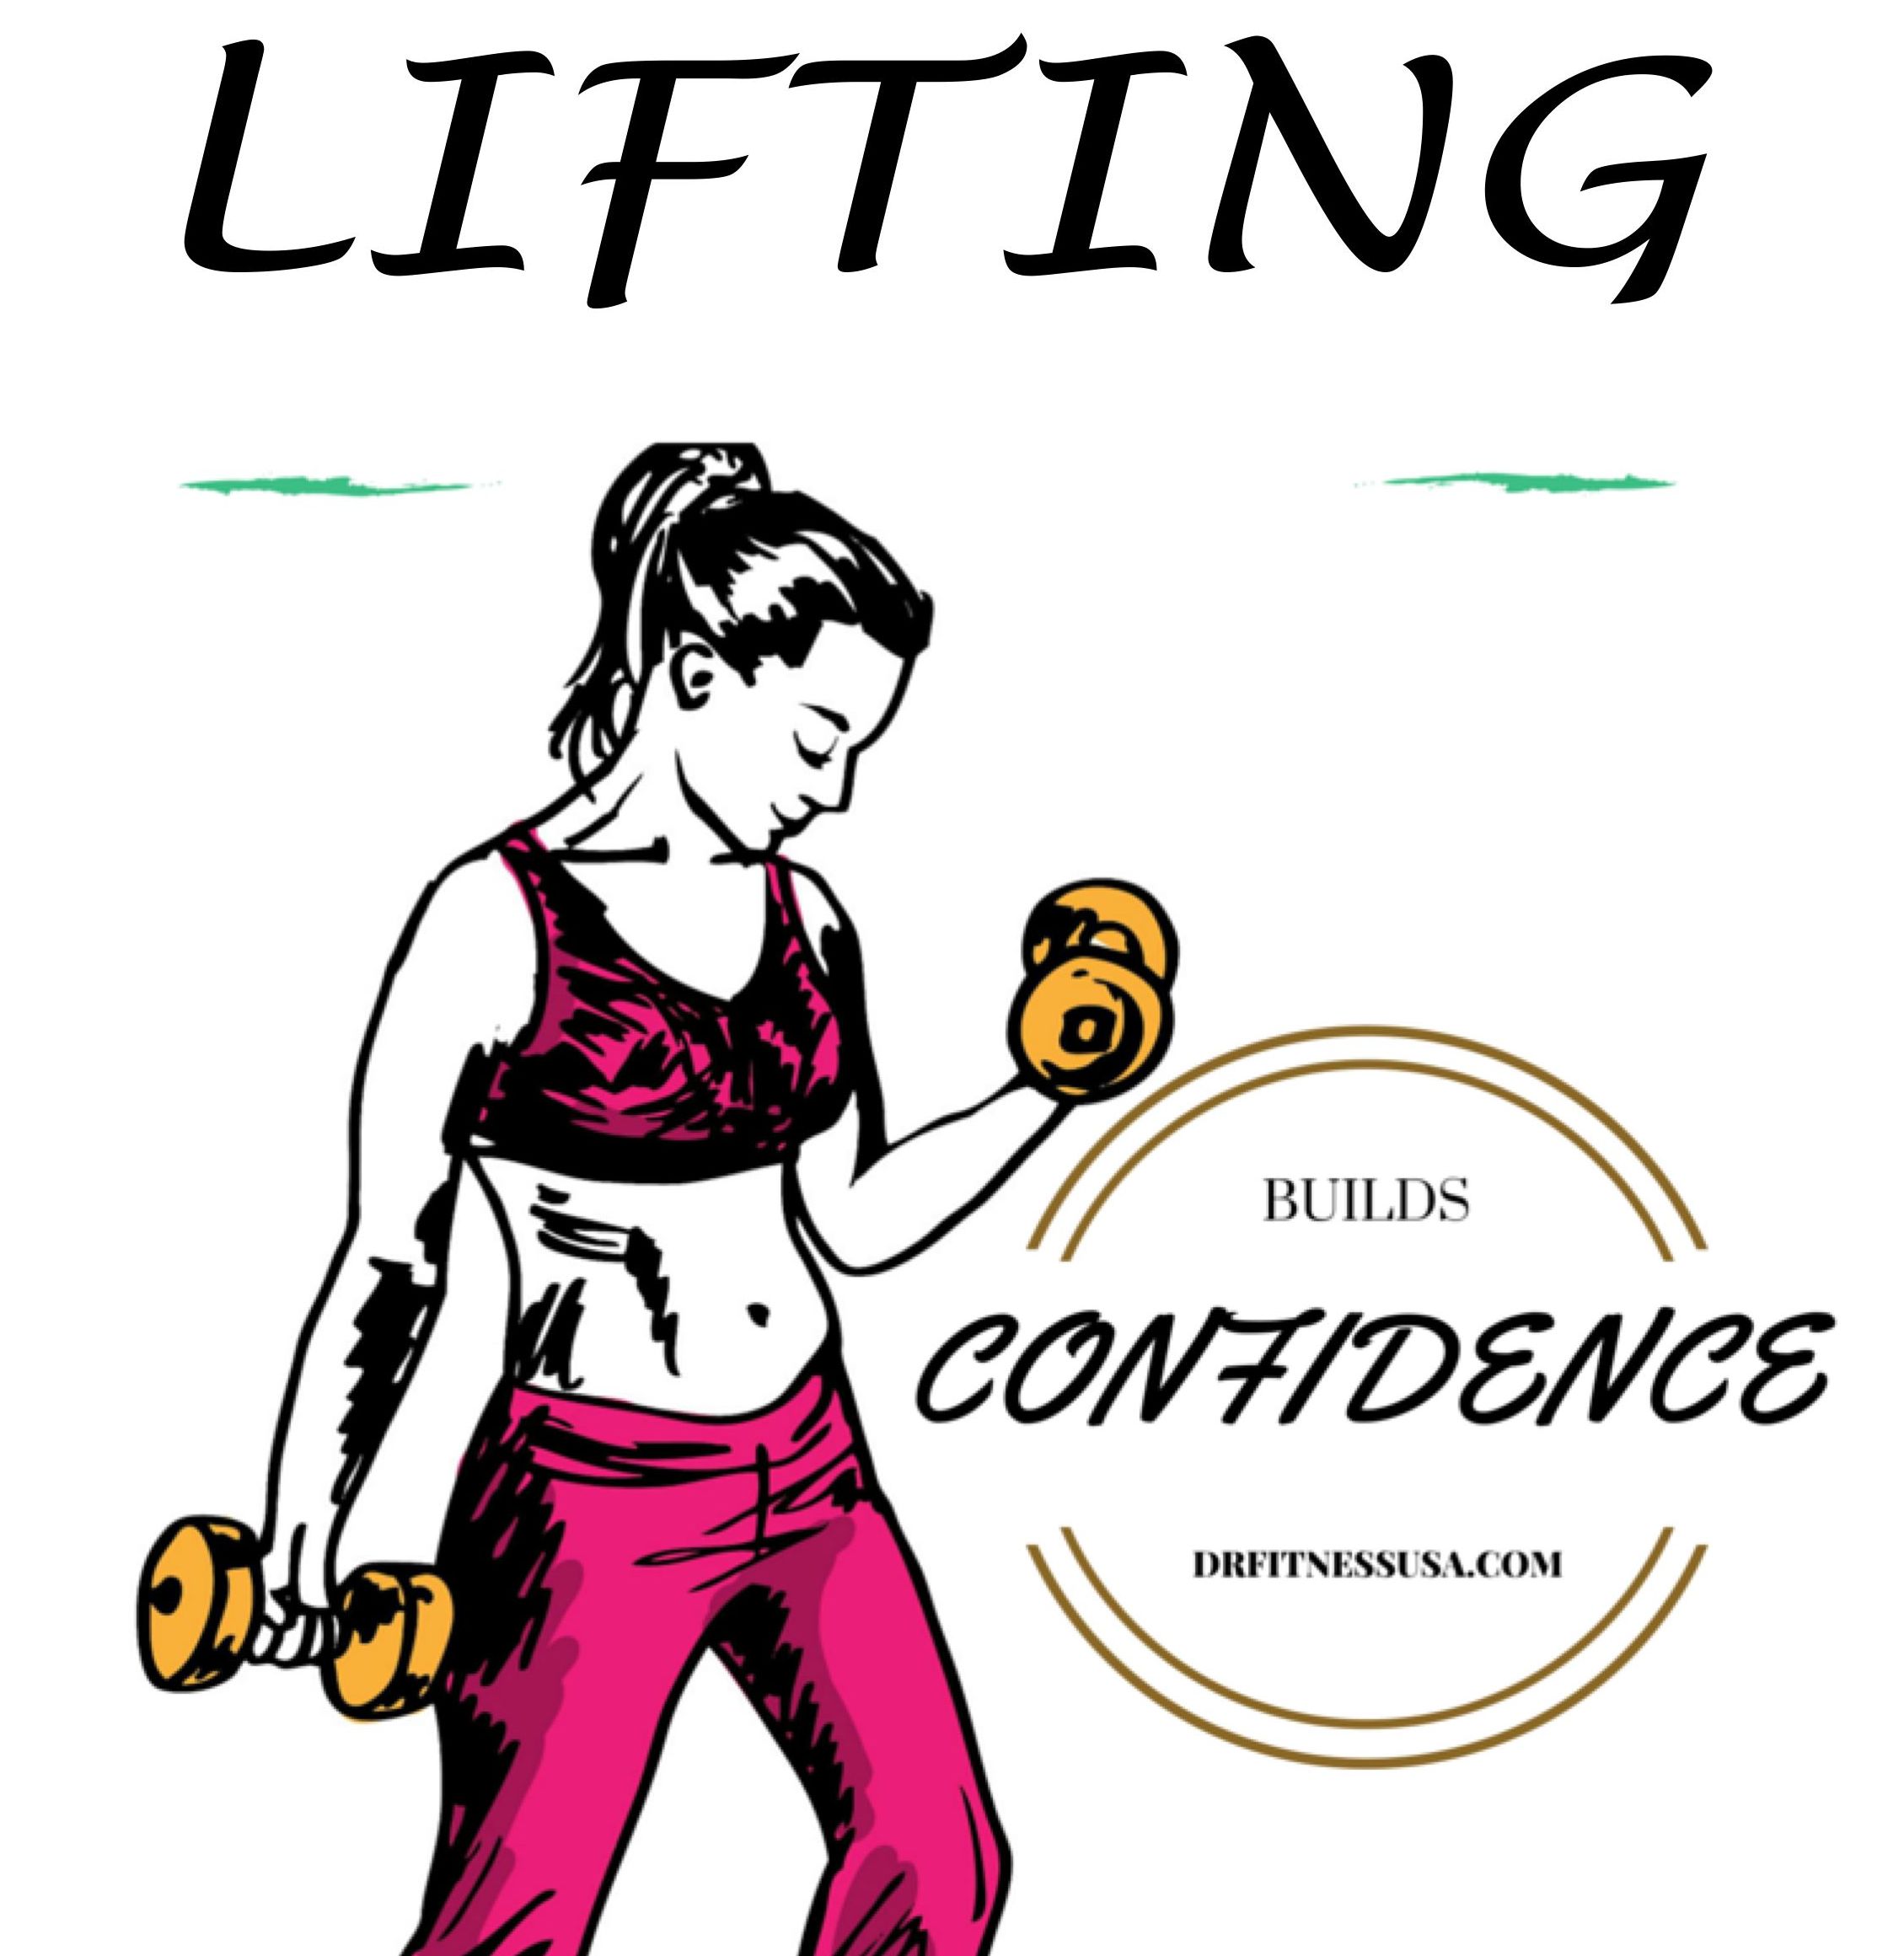 Lifting builds confidence